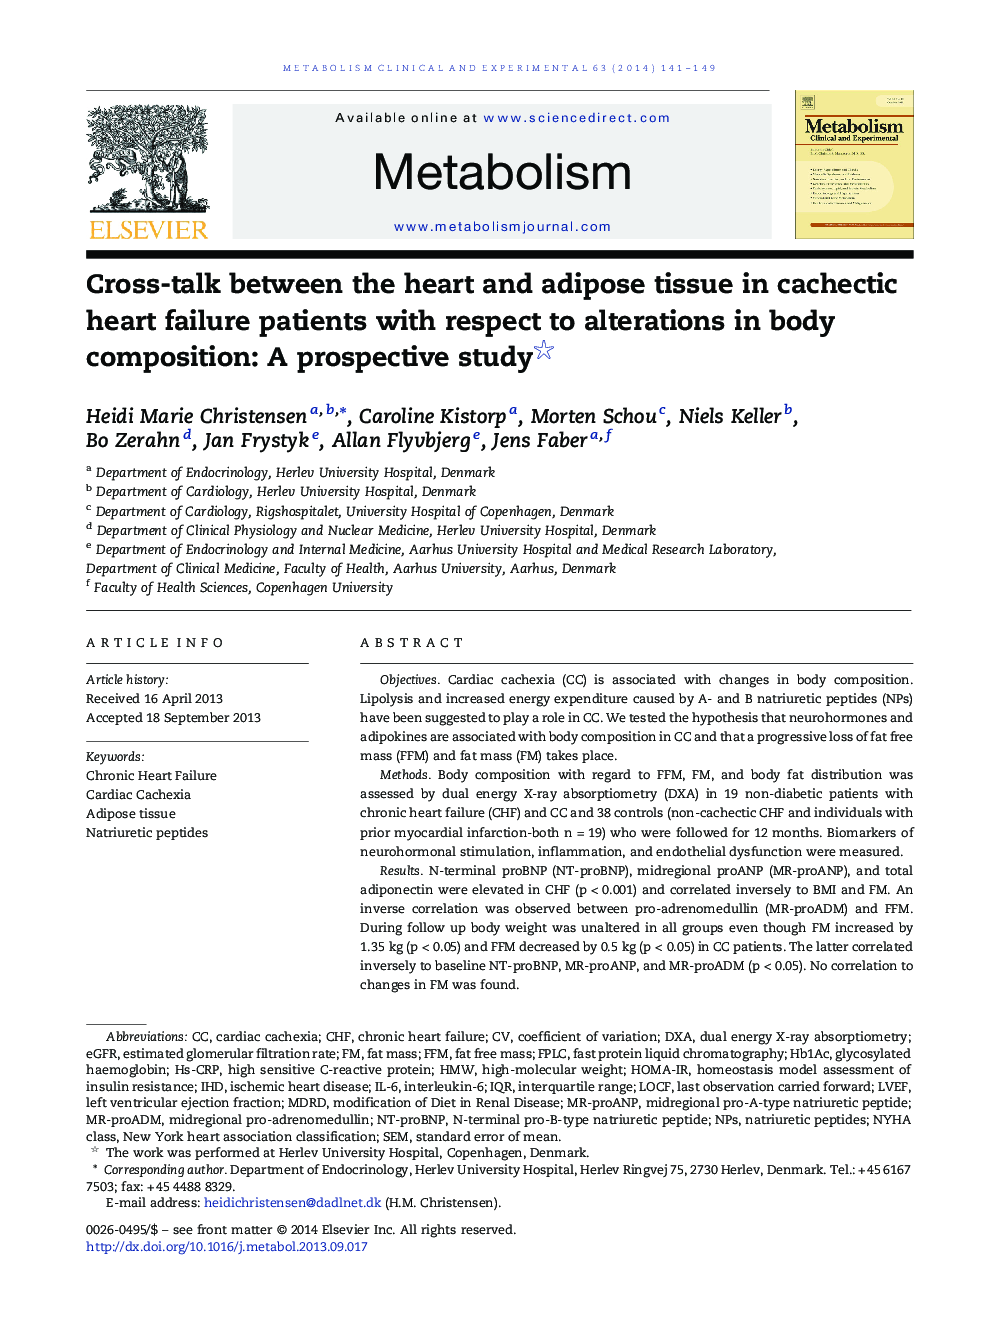 Cross-talk between the heart and adipose tissue in cachectic heart failure patients with respect to alterations in body composition: A prospective study 